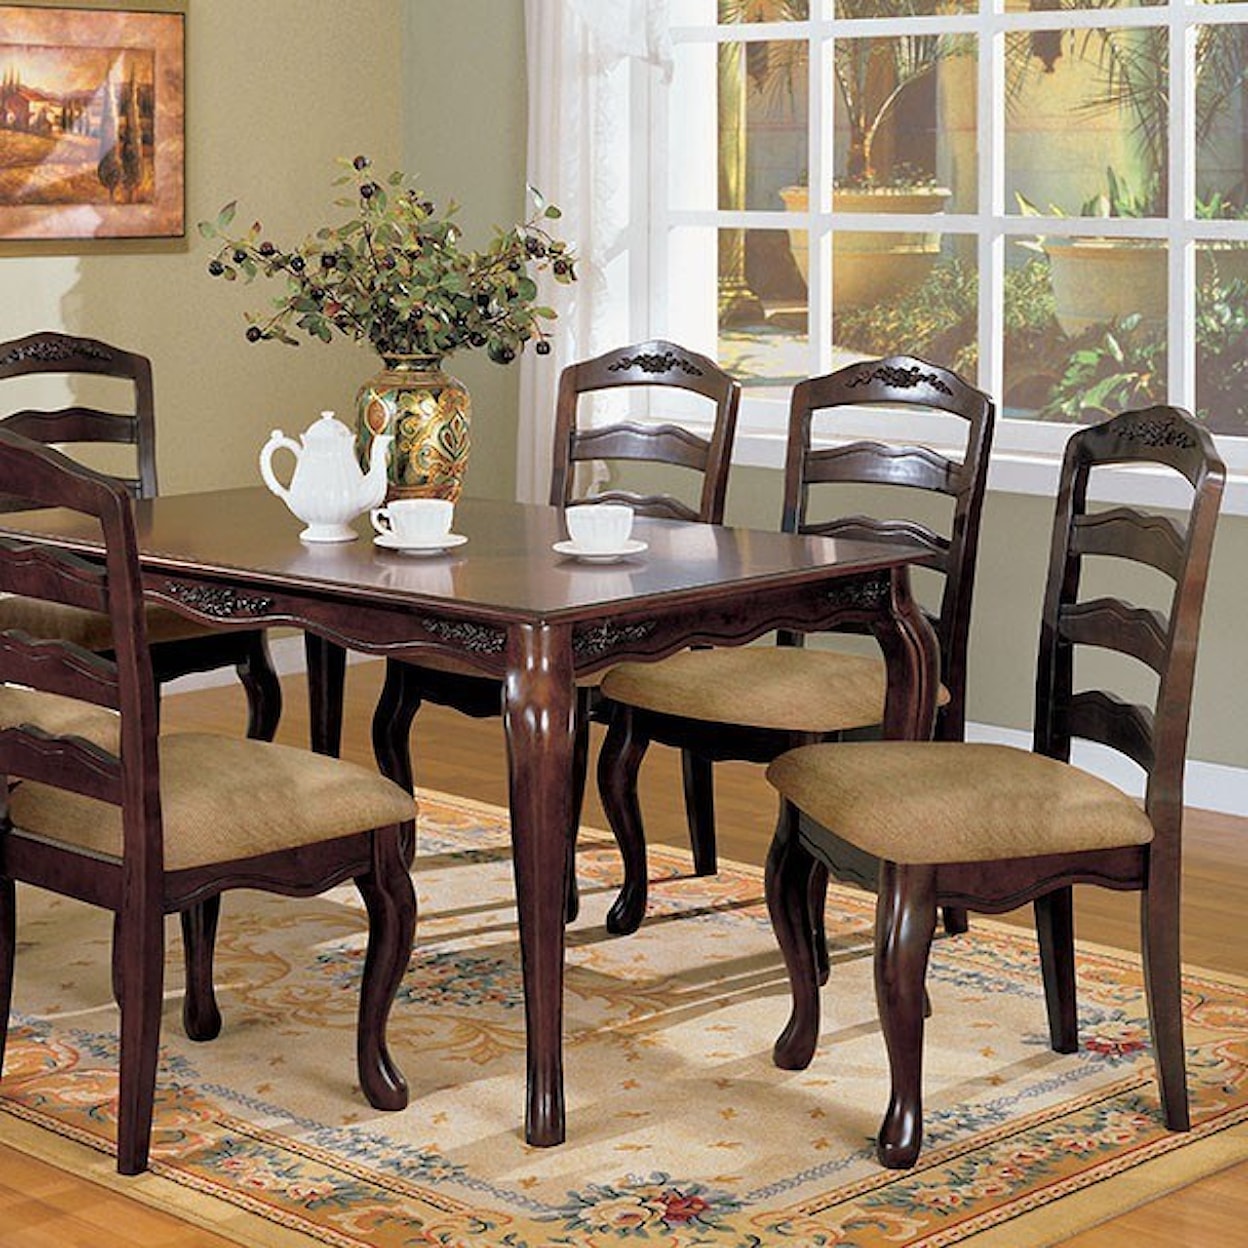 Furniture of America Townsville 7 Piece Dining Set